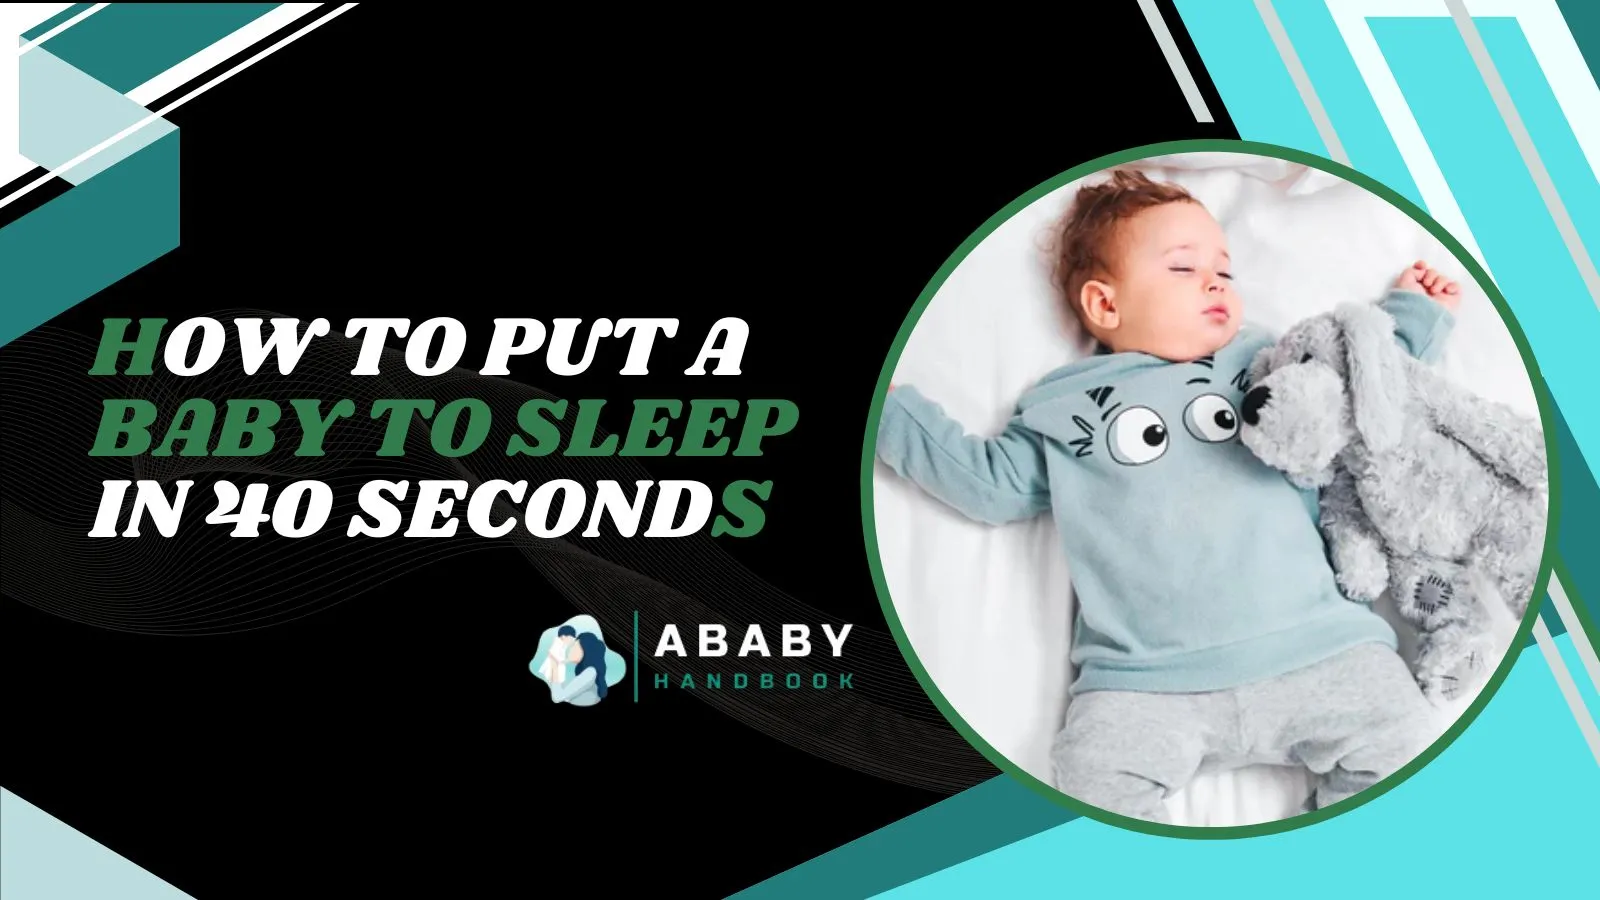 How To Put A Baby To Sleep In 40 Seconds | 5 Best Tips and Tricks